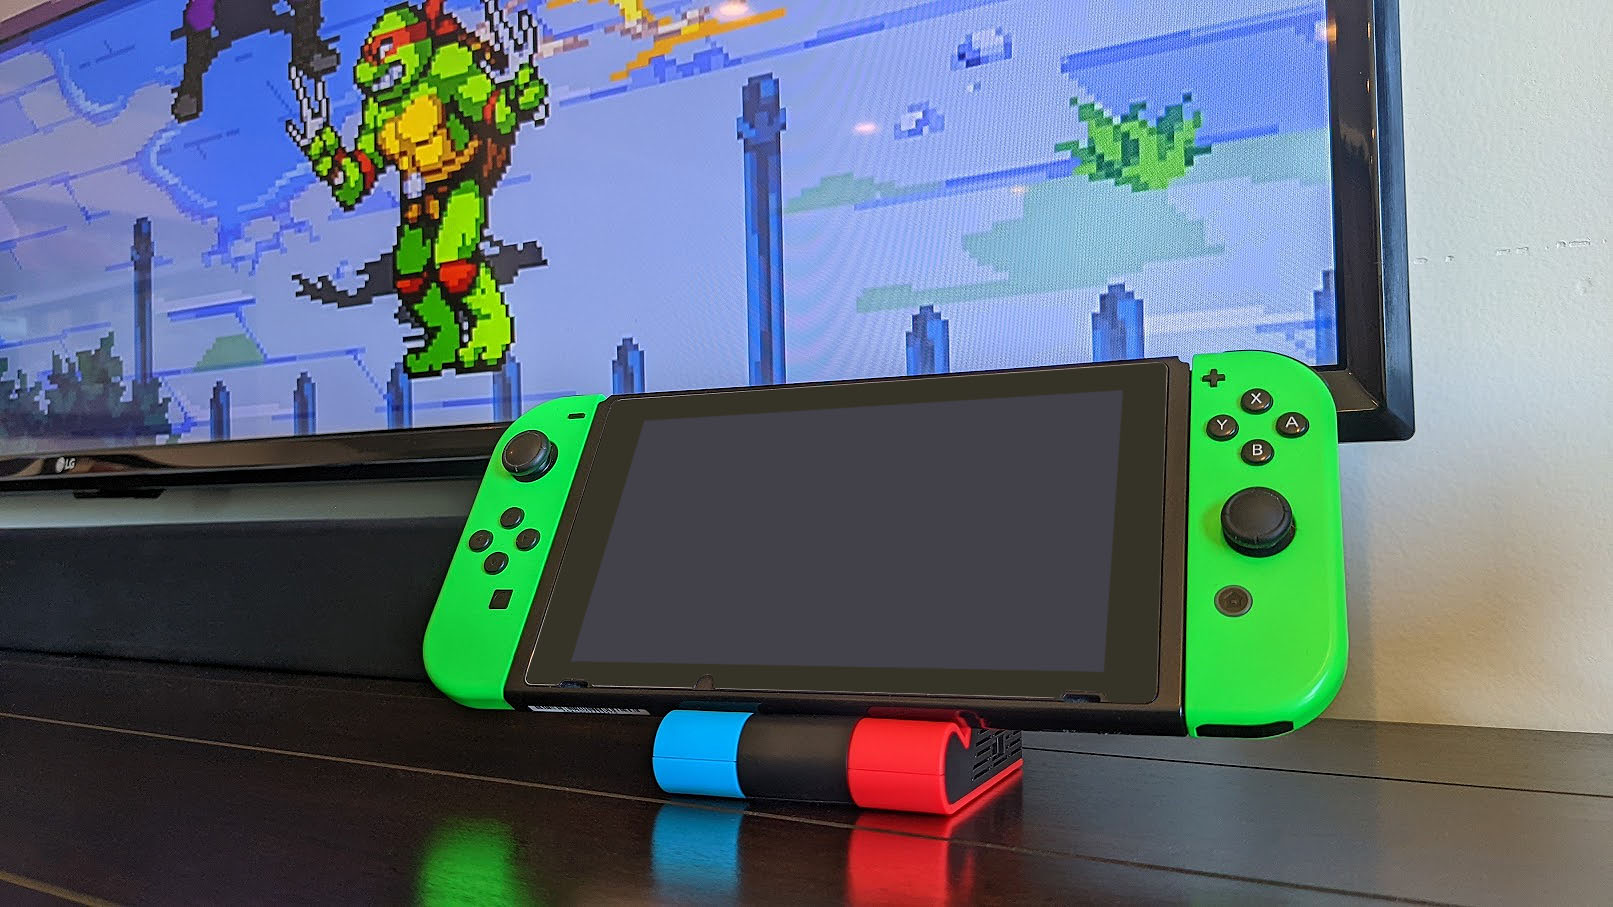 The Unitek Switch docking station connected to turn on the Ninja Turtles TV